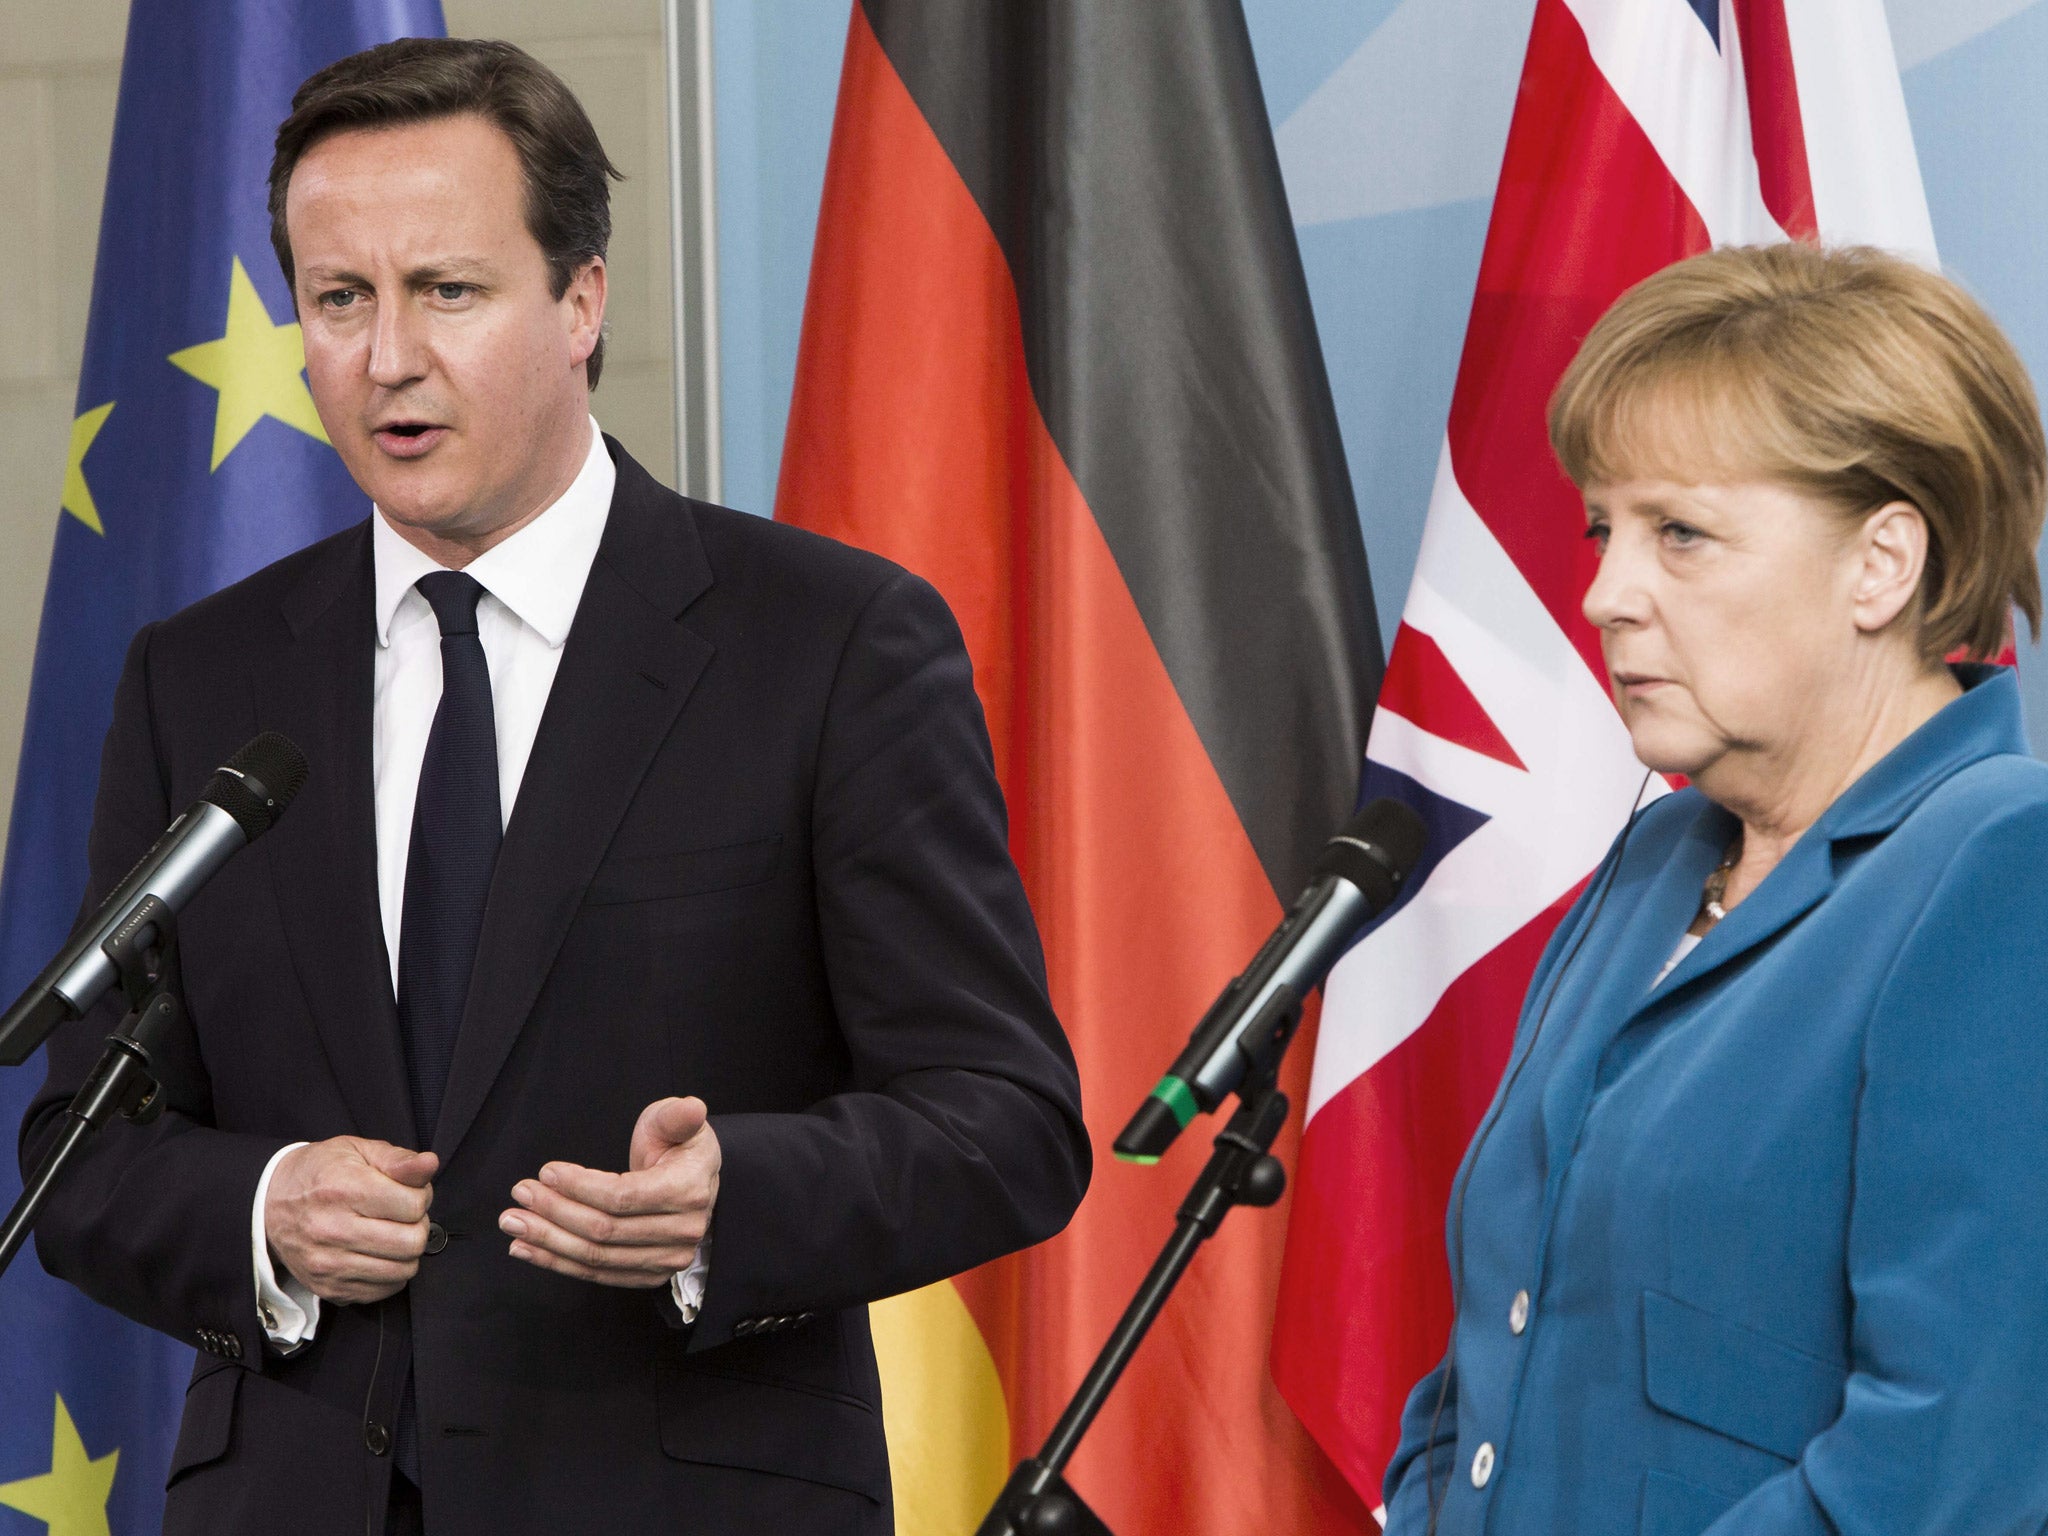 David Cameron with the German chancellor Angela Merkel earlier this year